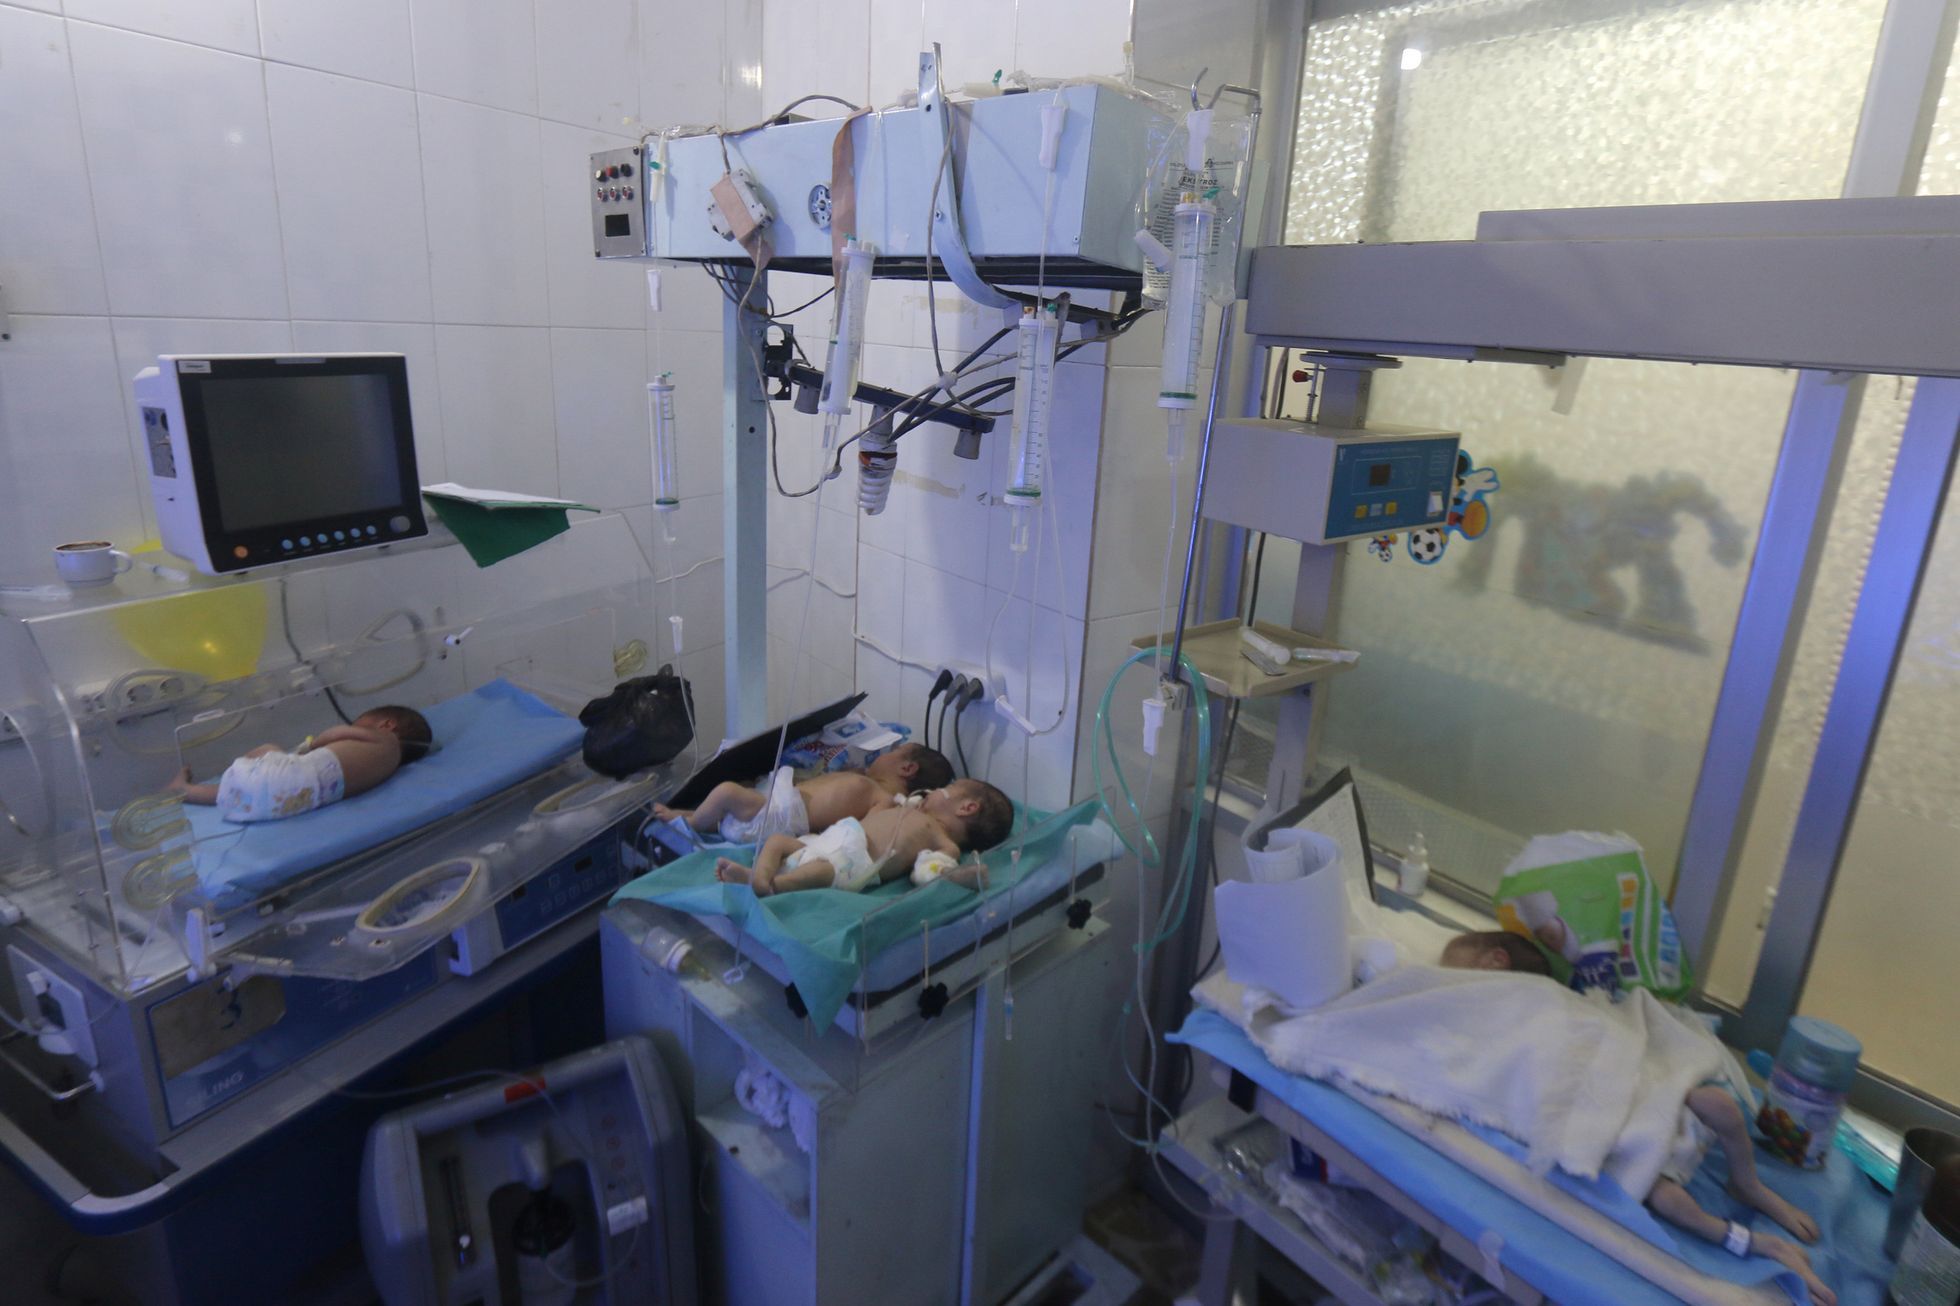 Babies are seen inside a nursery at a children's hospital that was partially damaged from recent airstrikes, in a rebel held area of Aleppo